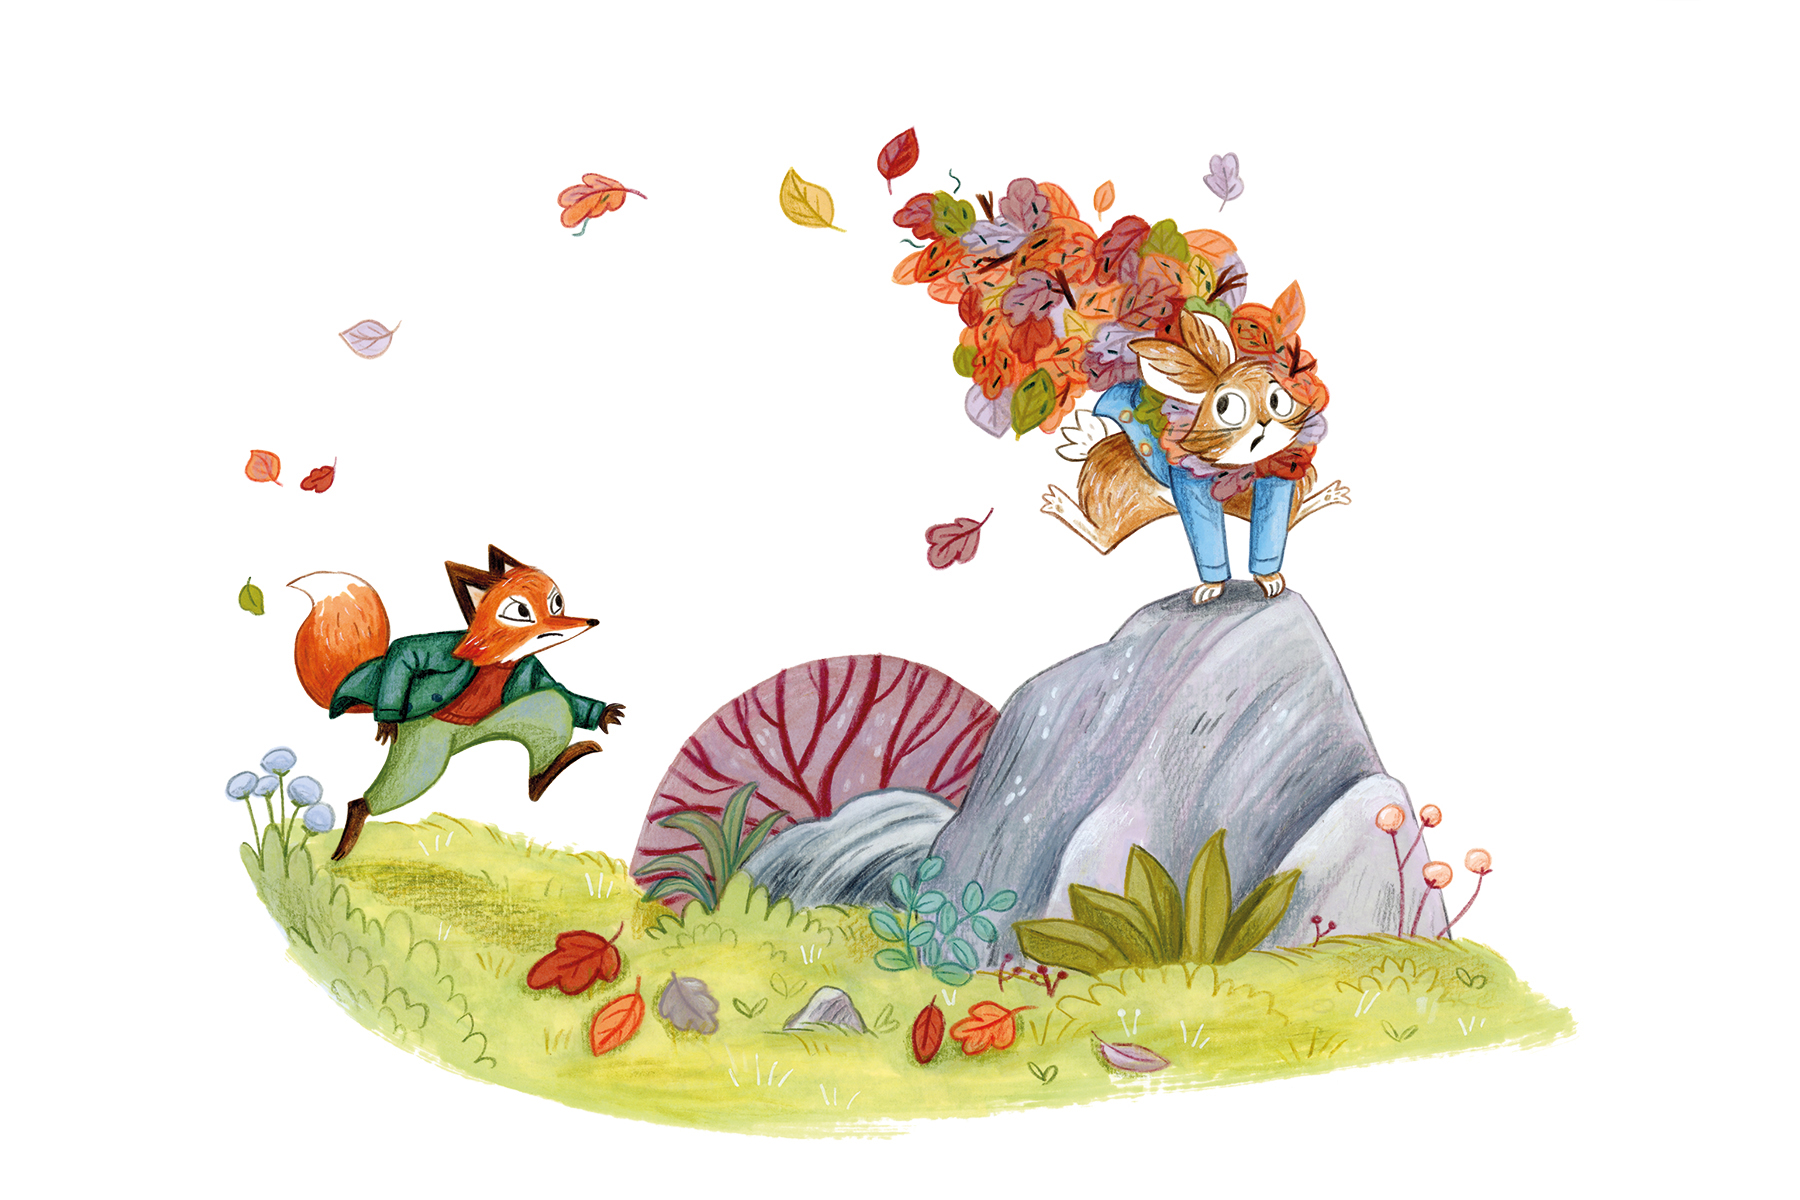 An illustration from Peter Rabbit: Hide and Seek showing Mr Tod chasing Peter Rabbit who is leaping over a rock